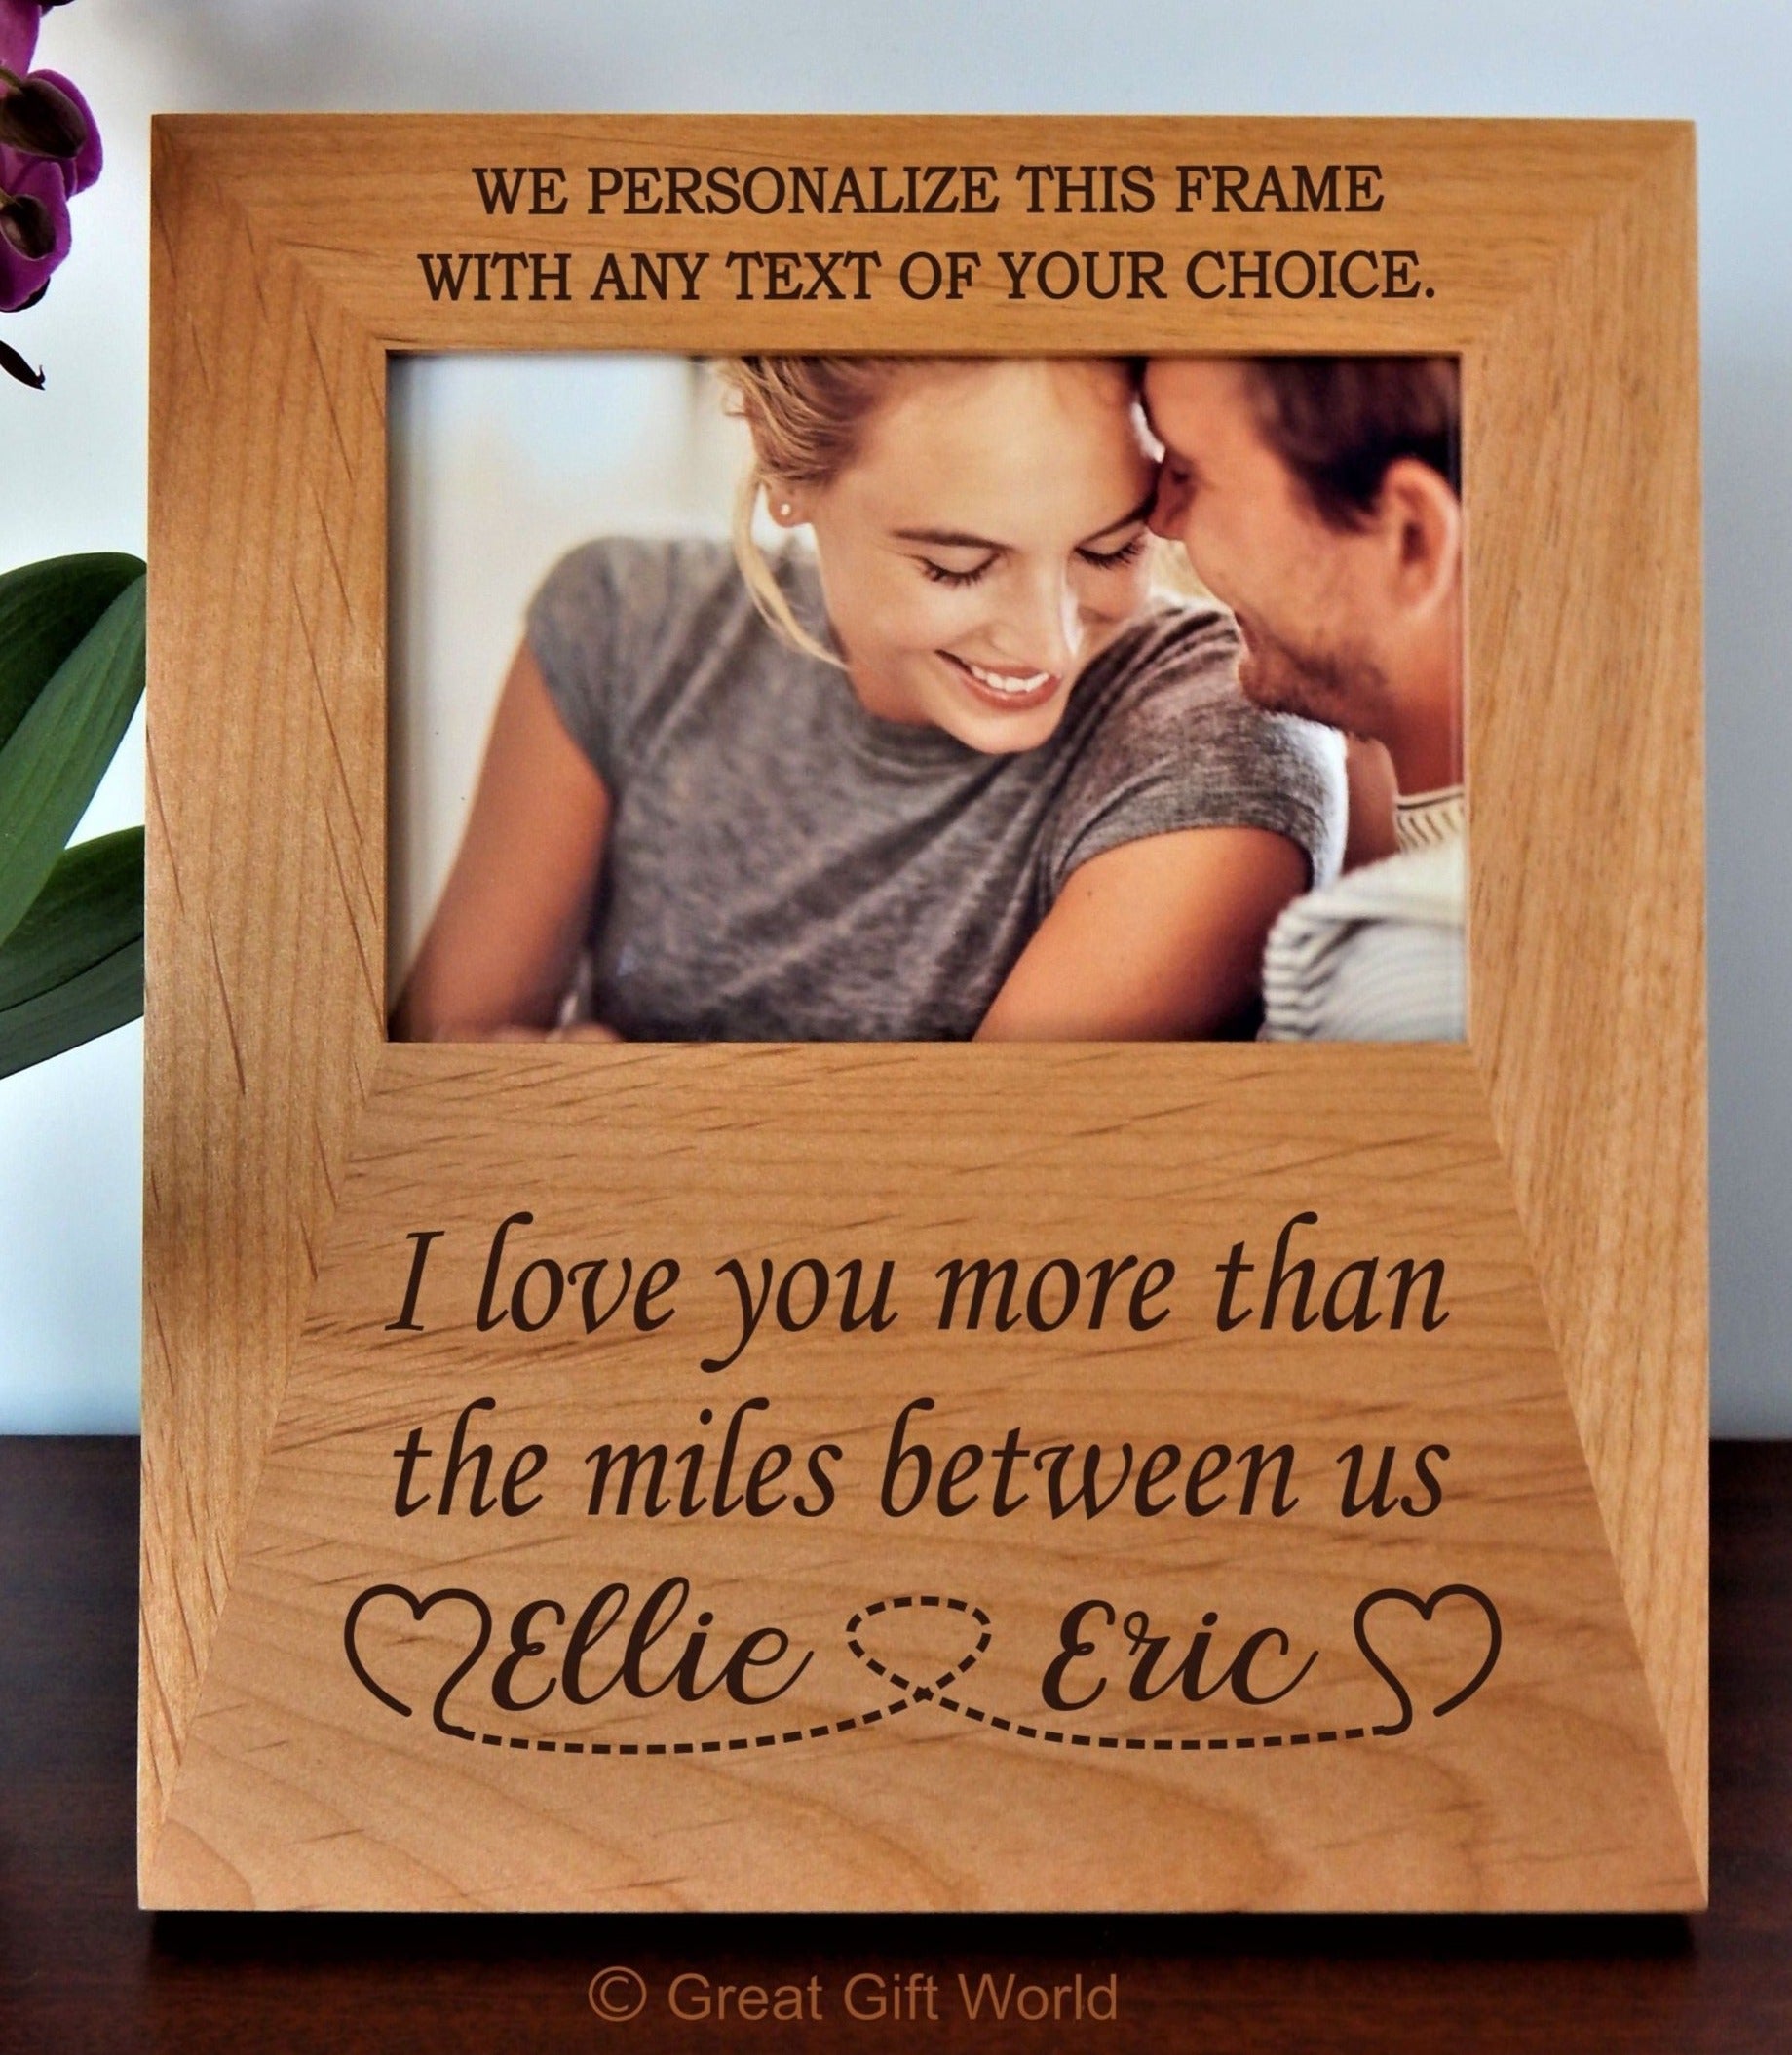 Personalized Picture Frame for Boyfriend | Husband Valentine's Day Gift 4x6 5x7